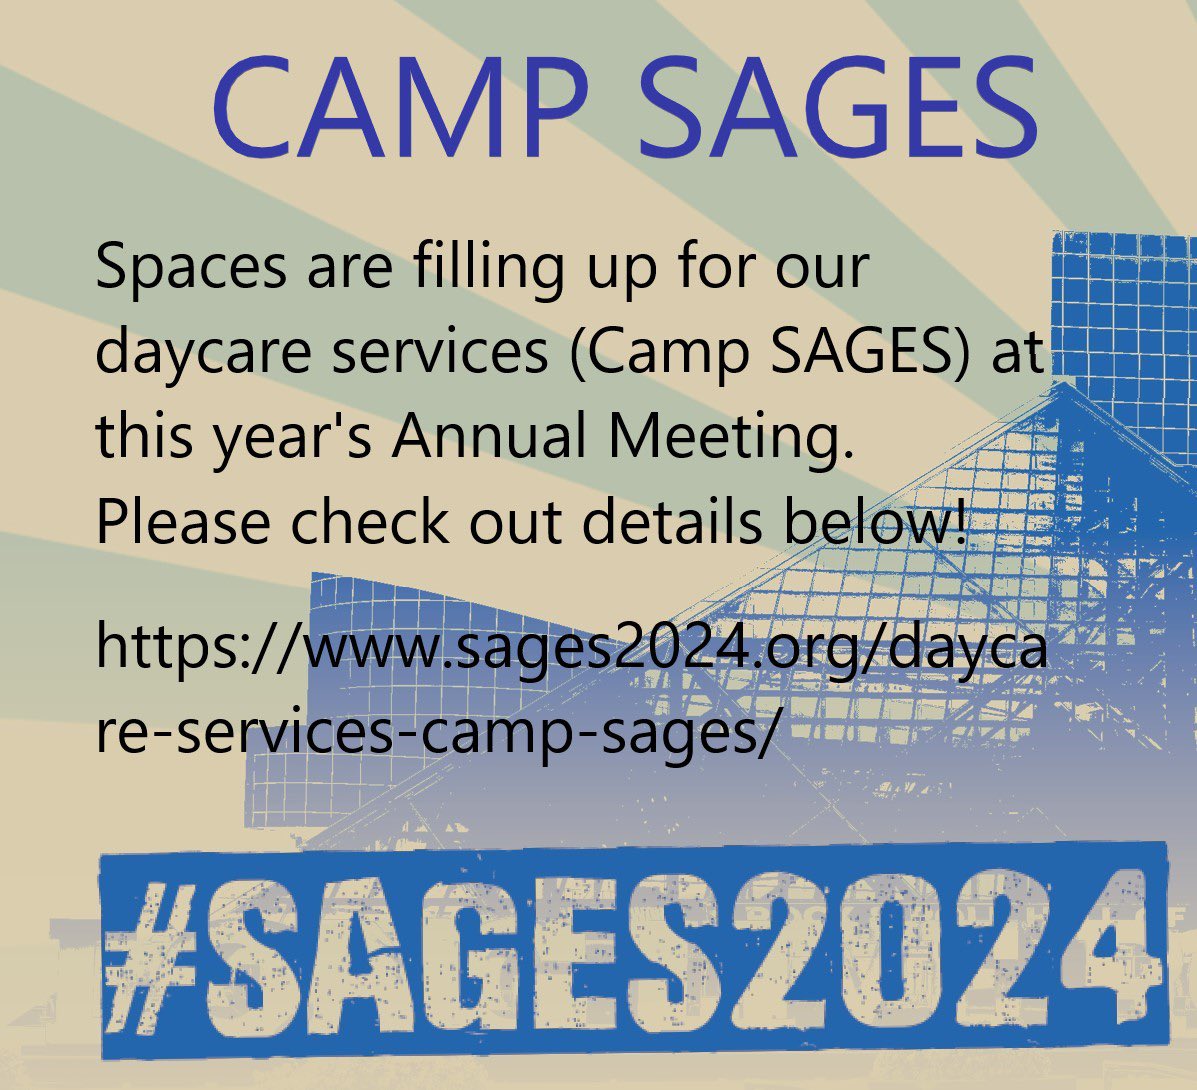 Don’t miss out on daycare services at this year’s meeting!! #sages2024 sages2024.org/daycare-servic…